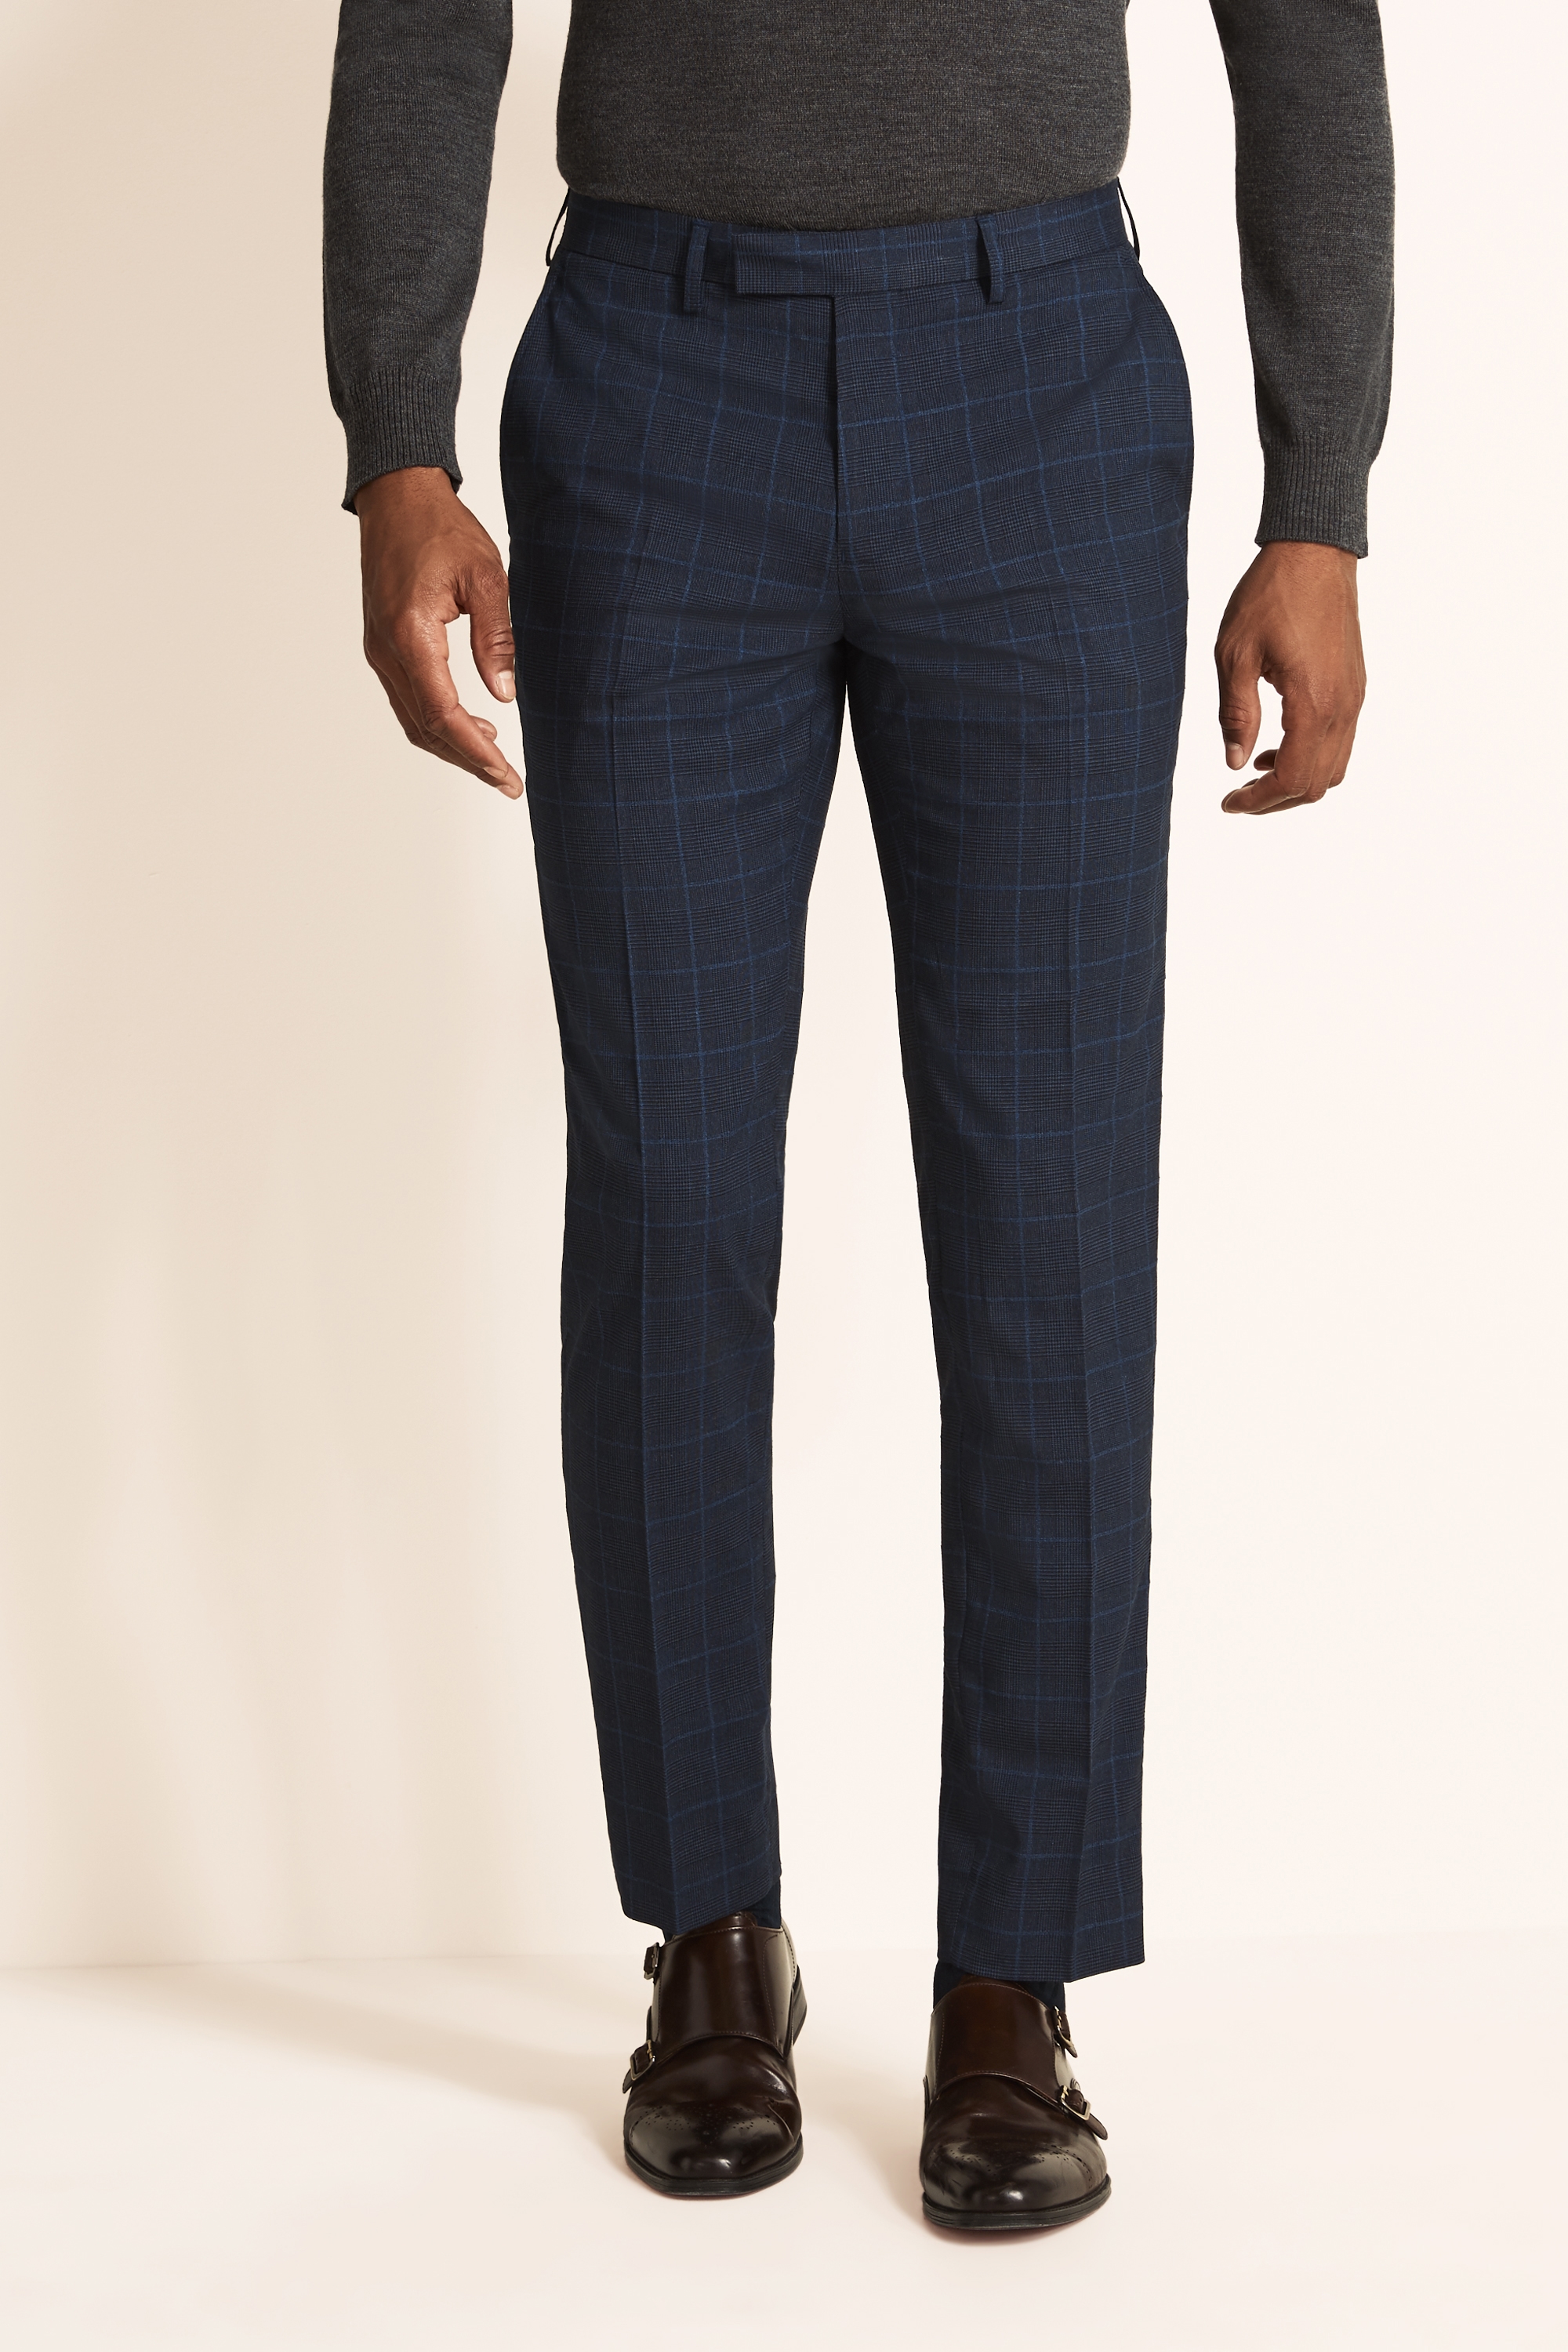 Moss 1851 Tailored Fit Machine Washable Blue Boucle WindowpaneTrousers ...